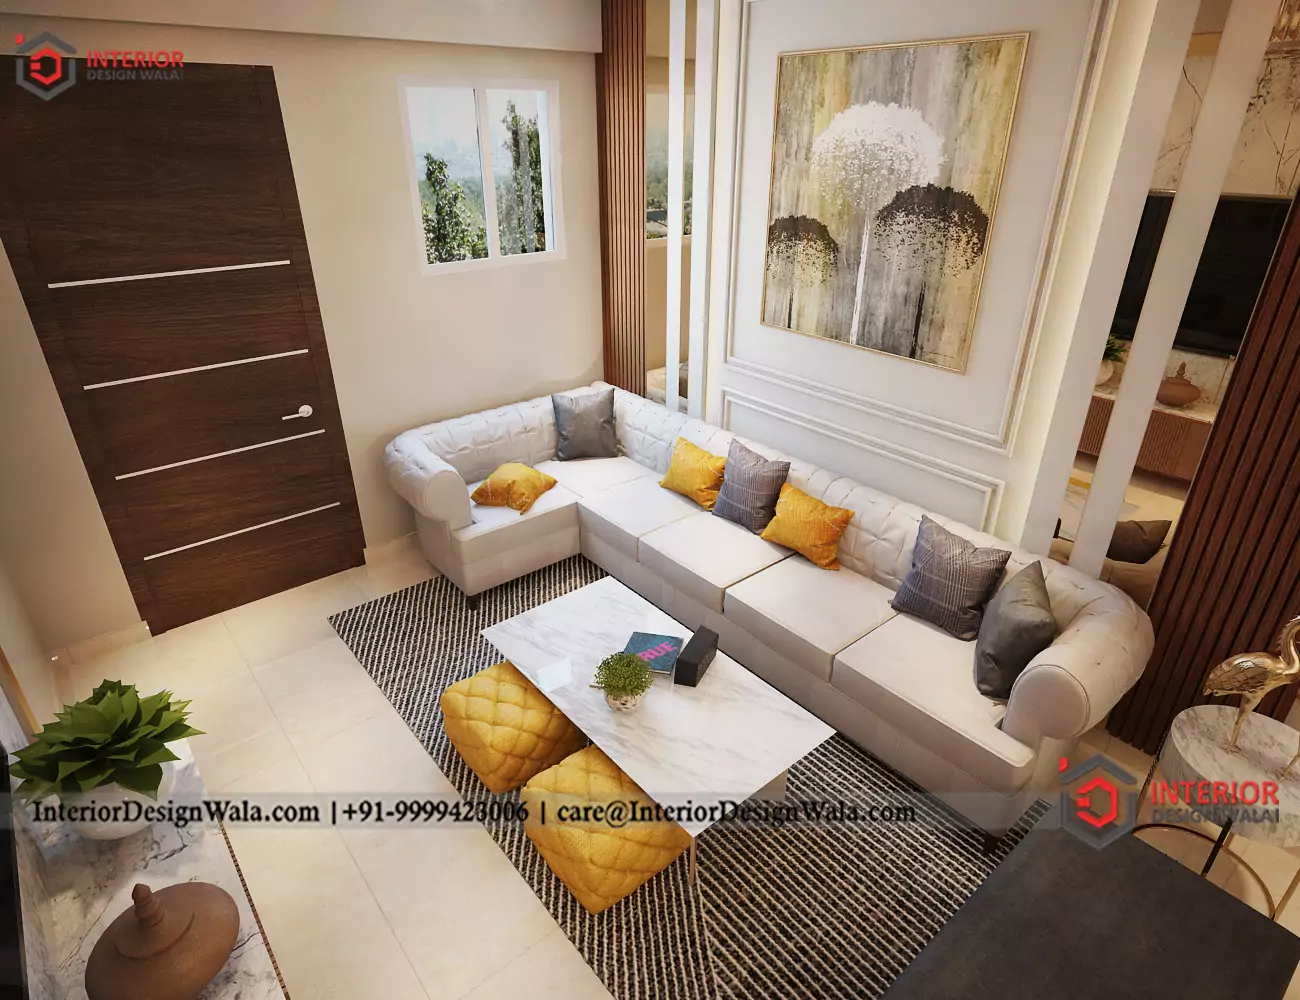 Drawing Room Interior Design: Create Stylish Relaxing Space-saigonsouth.com.vn